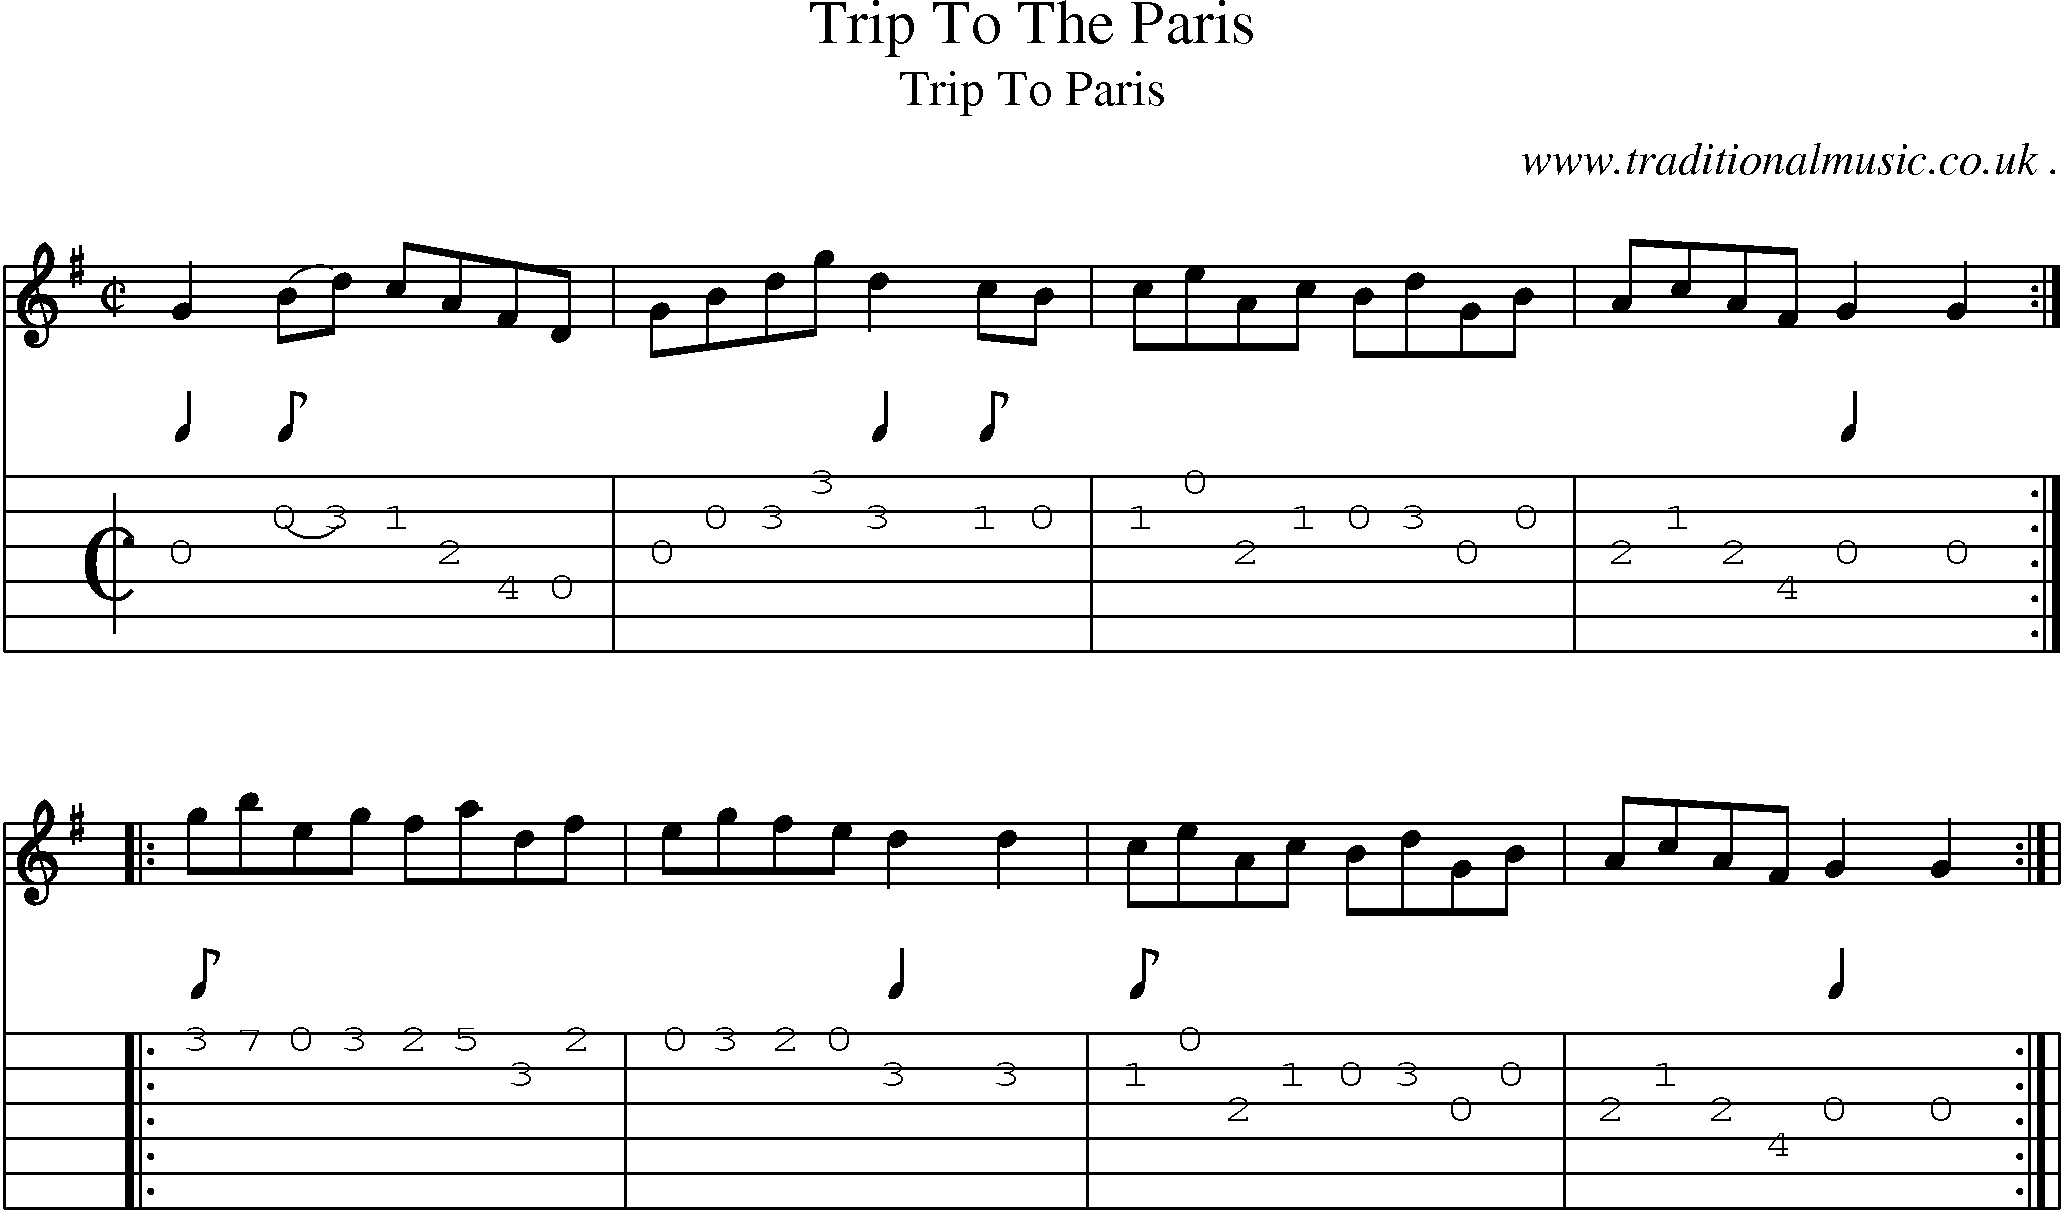 Sheet-Music and Guitar Tabs for Trip To The Paris